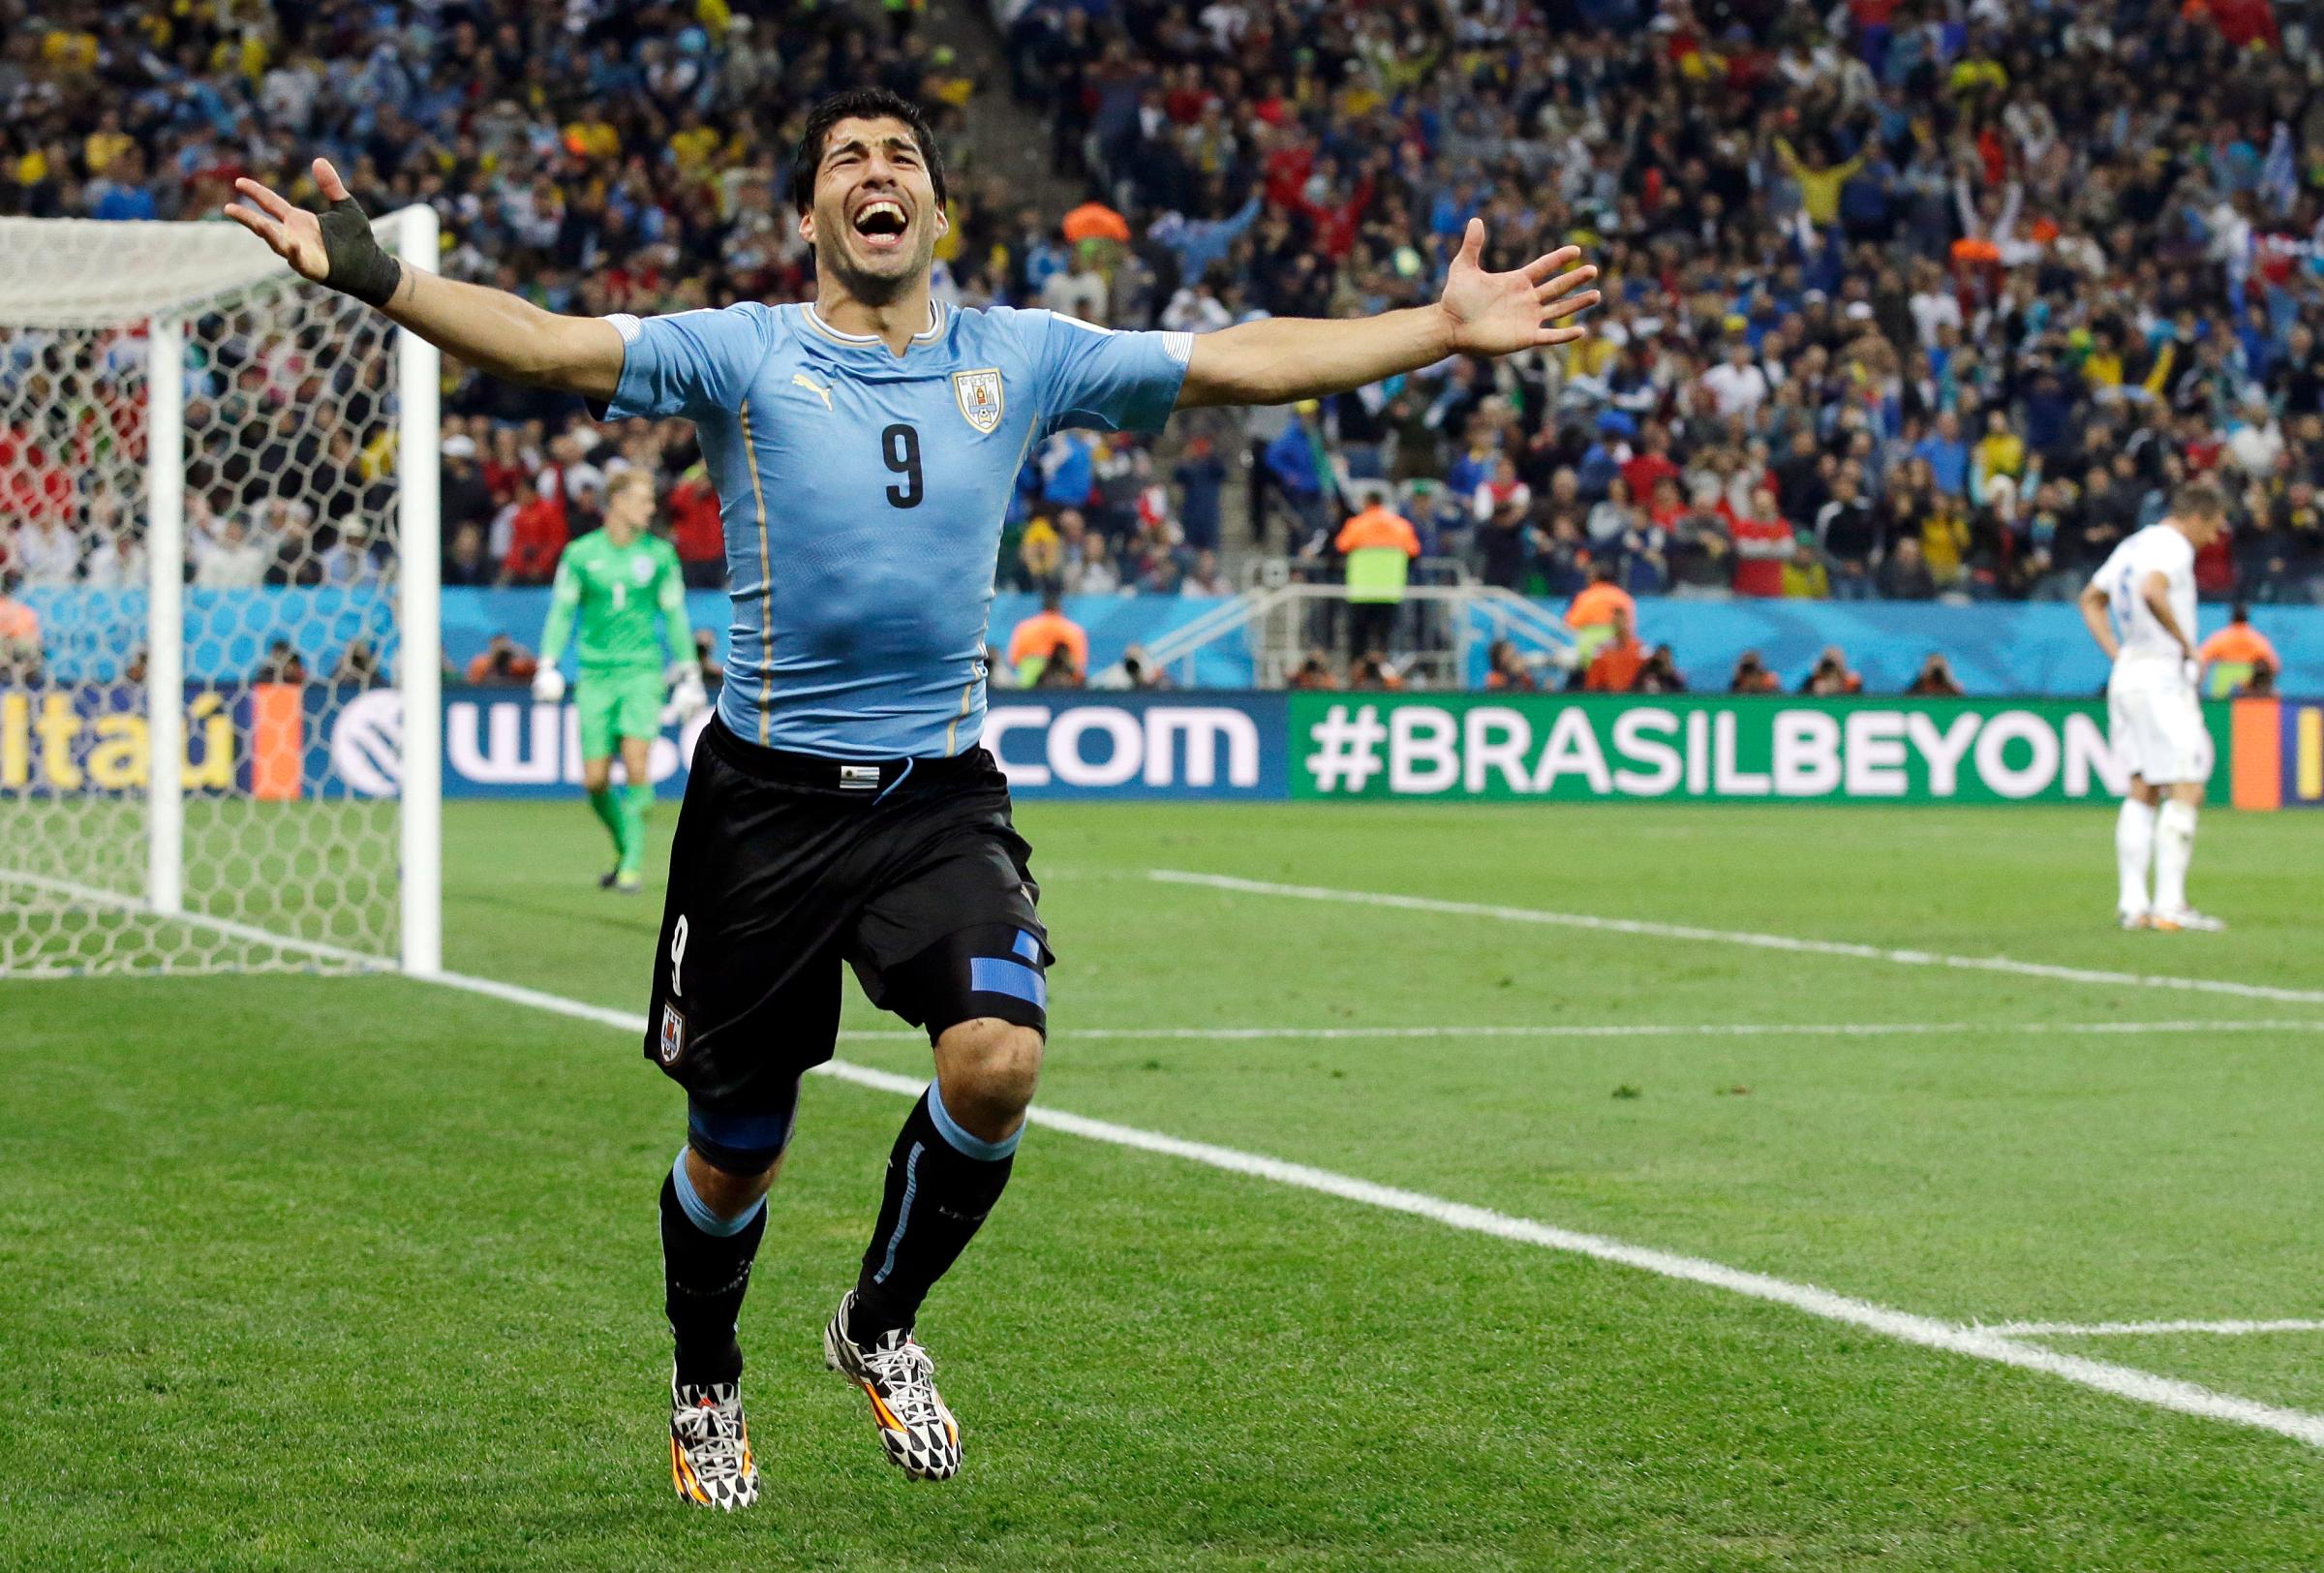 Uruguay's Luis Suarez celebrates after scoring his side's second goal during the group D World Cup soccer match between Uruguay and England at the Itaquerao Stadium in Sao Paulo, Brazil on June 19, 2014.